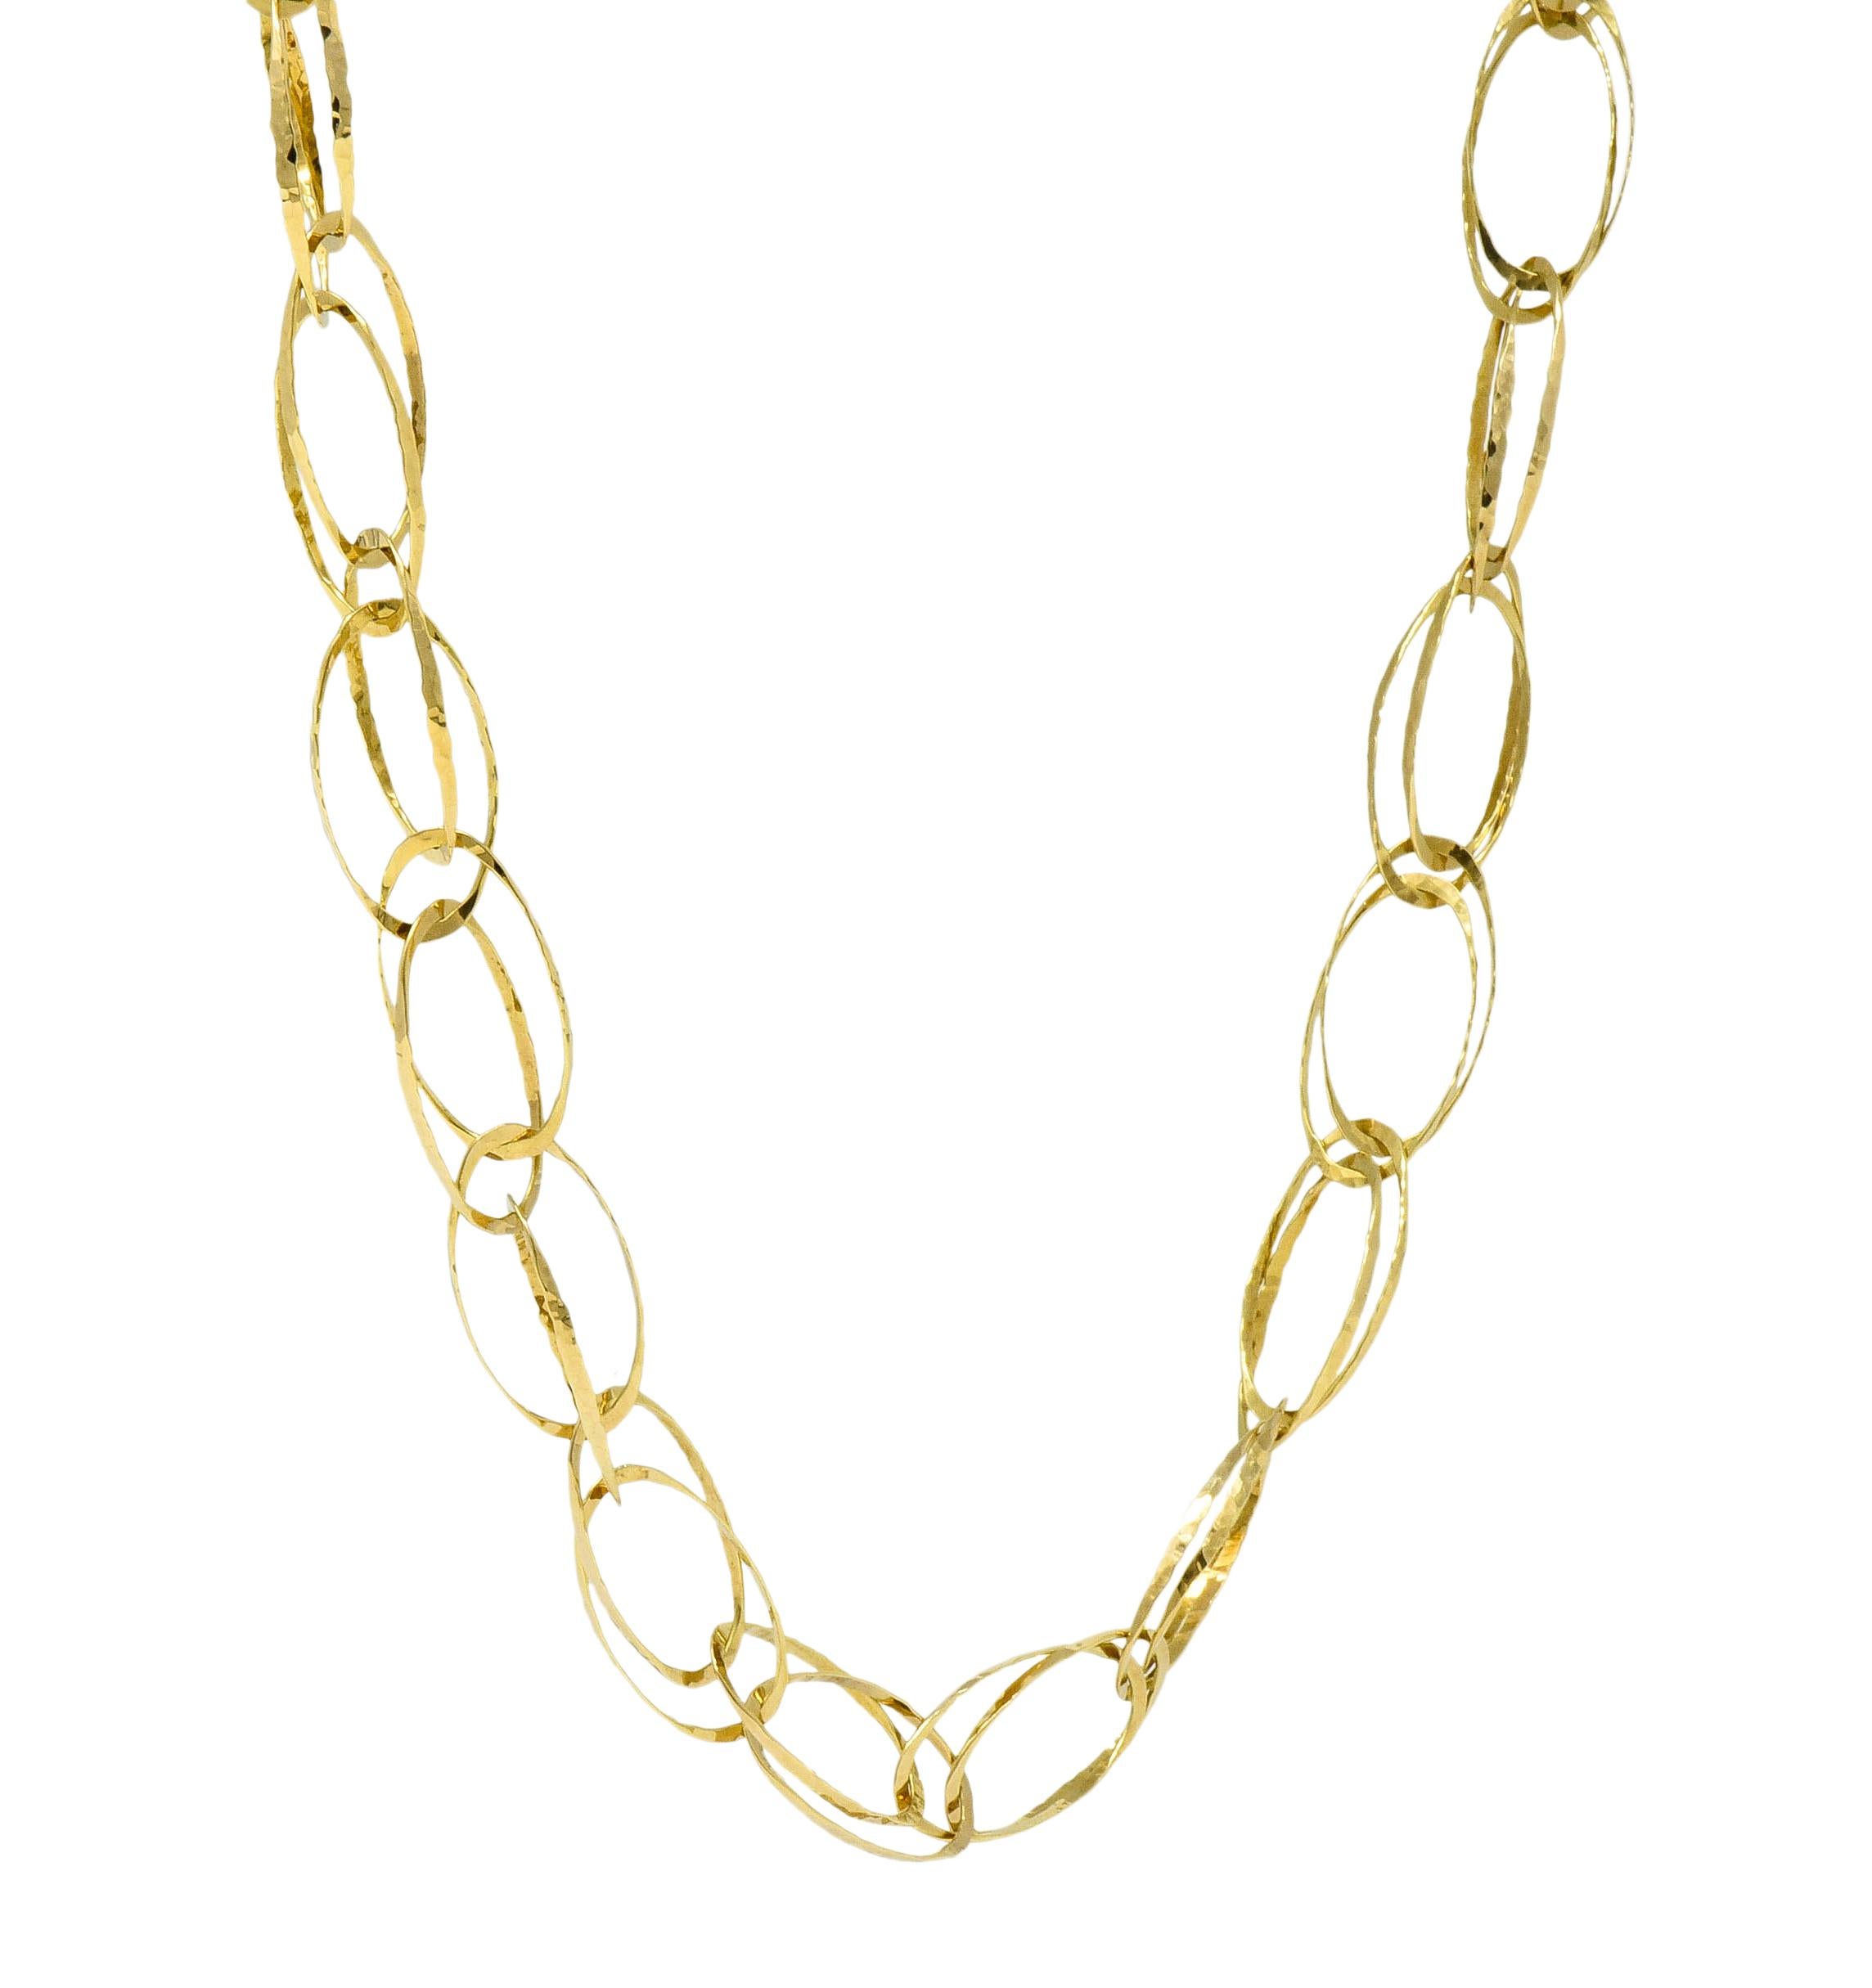 Women's or Men's Contemporary 18 Karat Gold Yellow Hammered Link Necklace